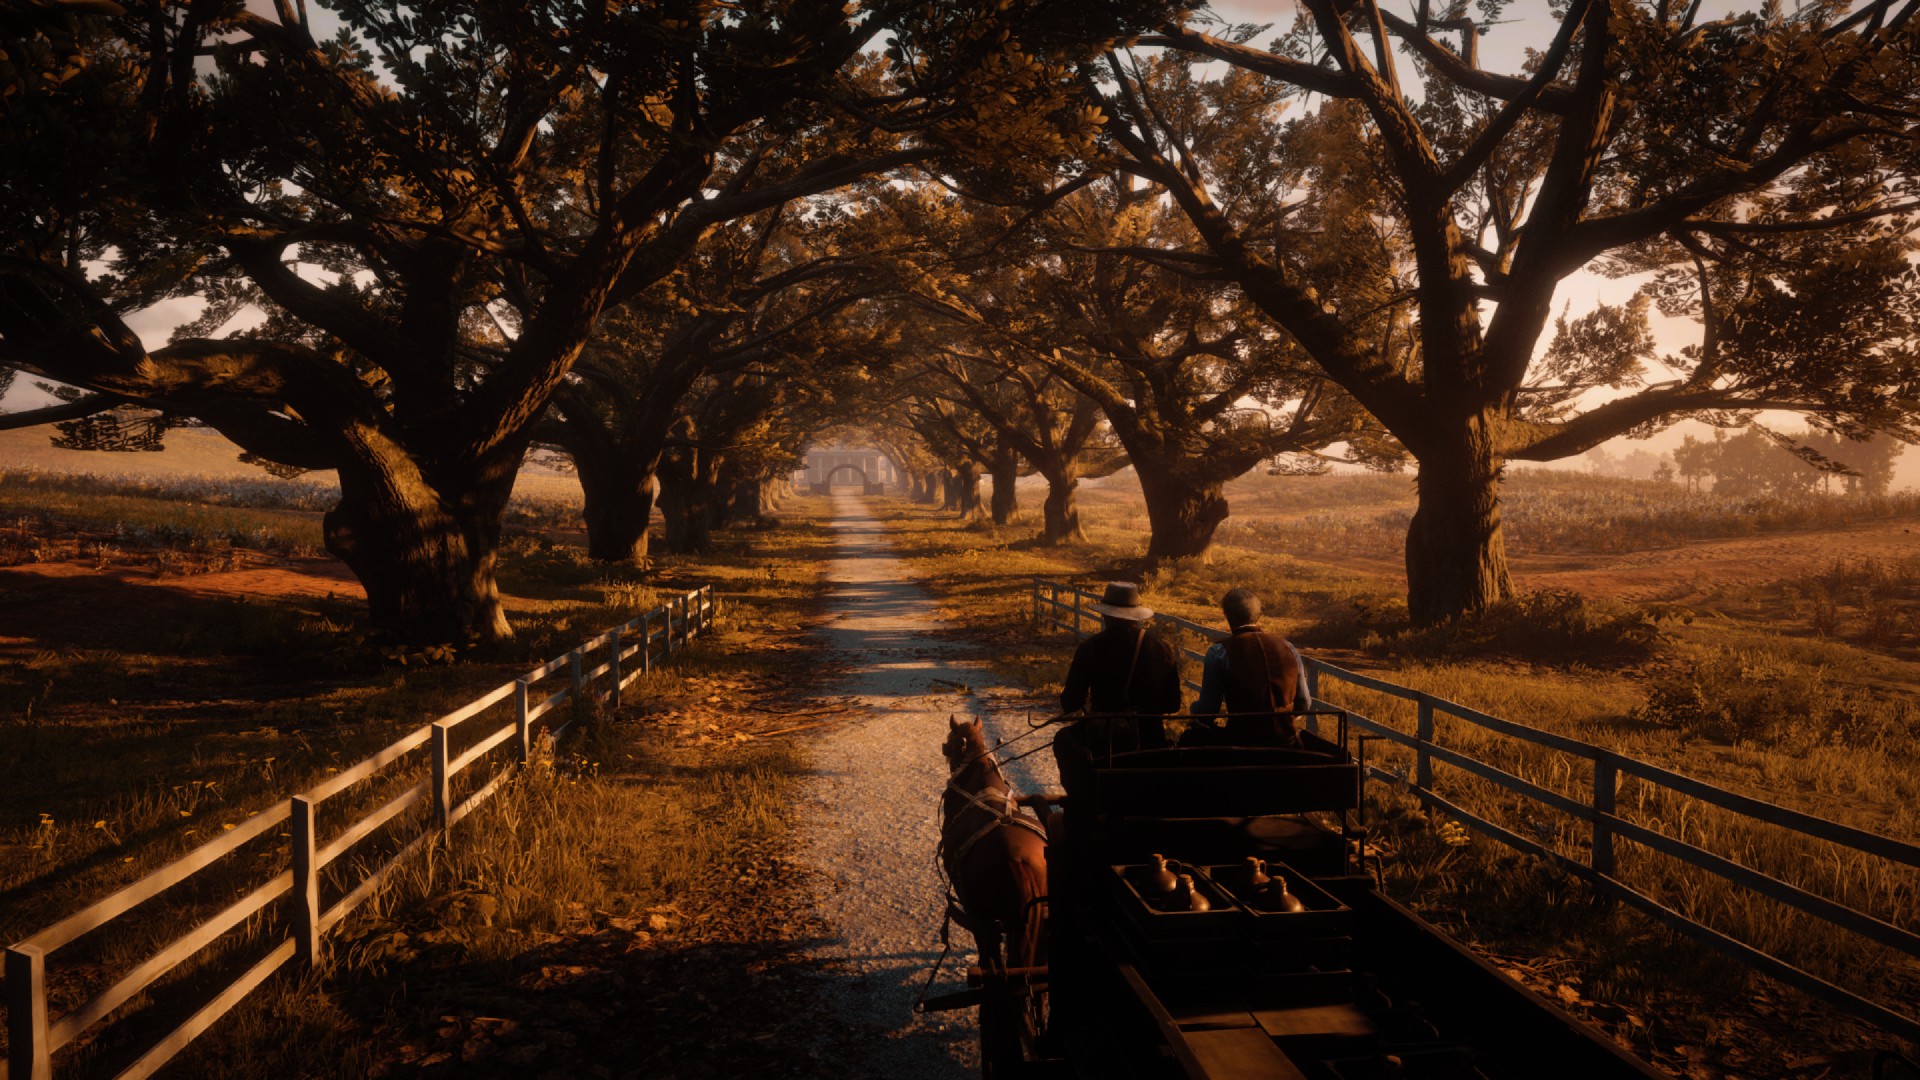 General 1920x1080 Red Dead Redemption 2 video games horse Rockstar Games sitting video game characters CGI video game art screen shot trees path animals cowboy hats sunlight video game men